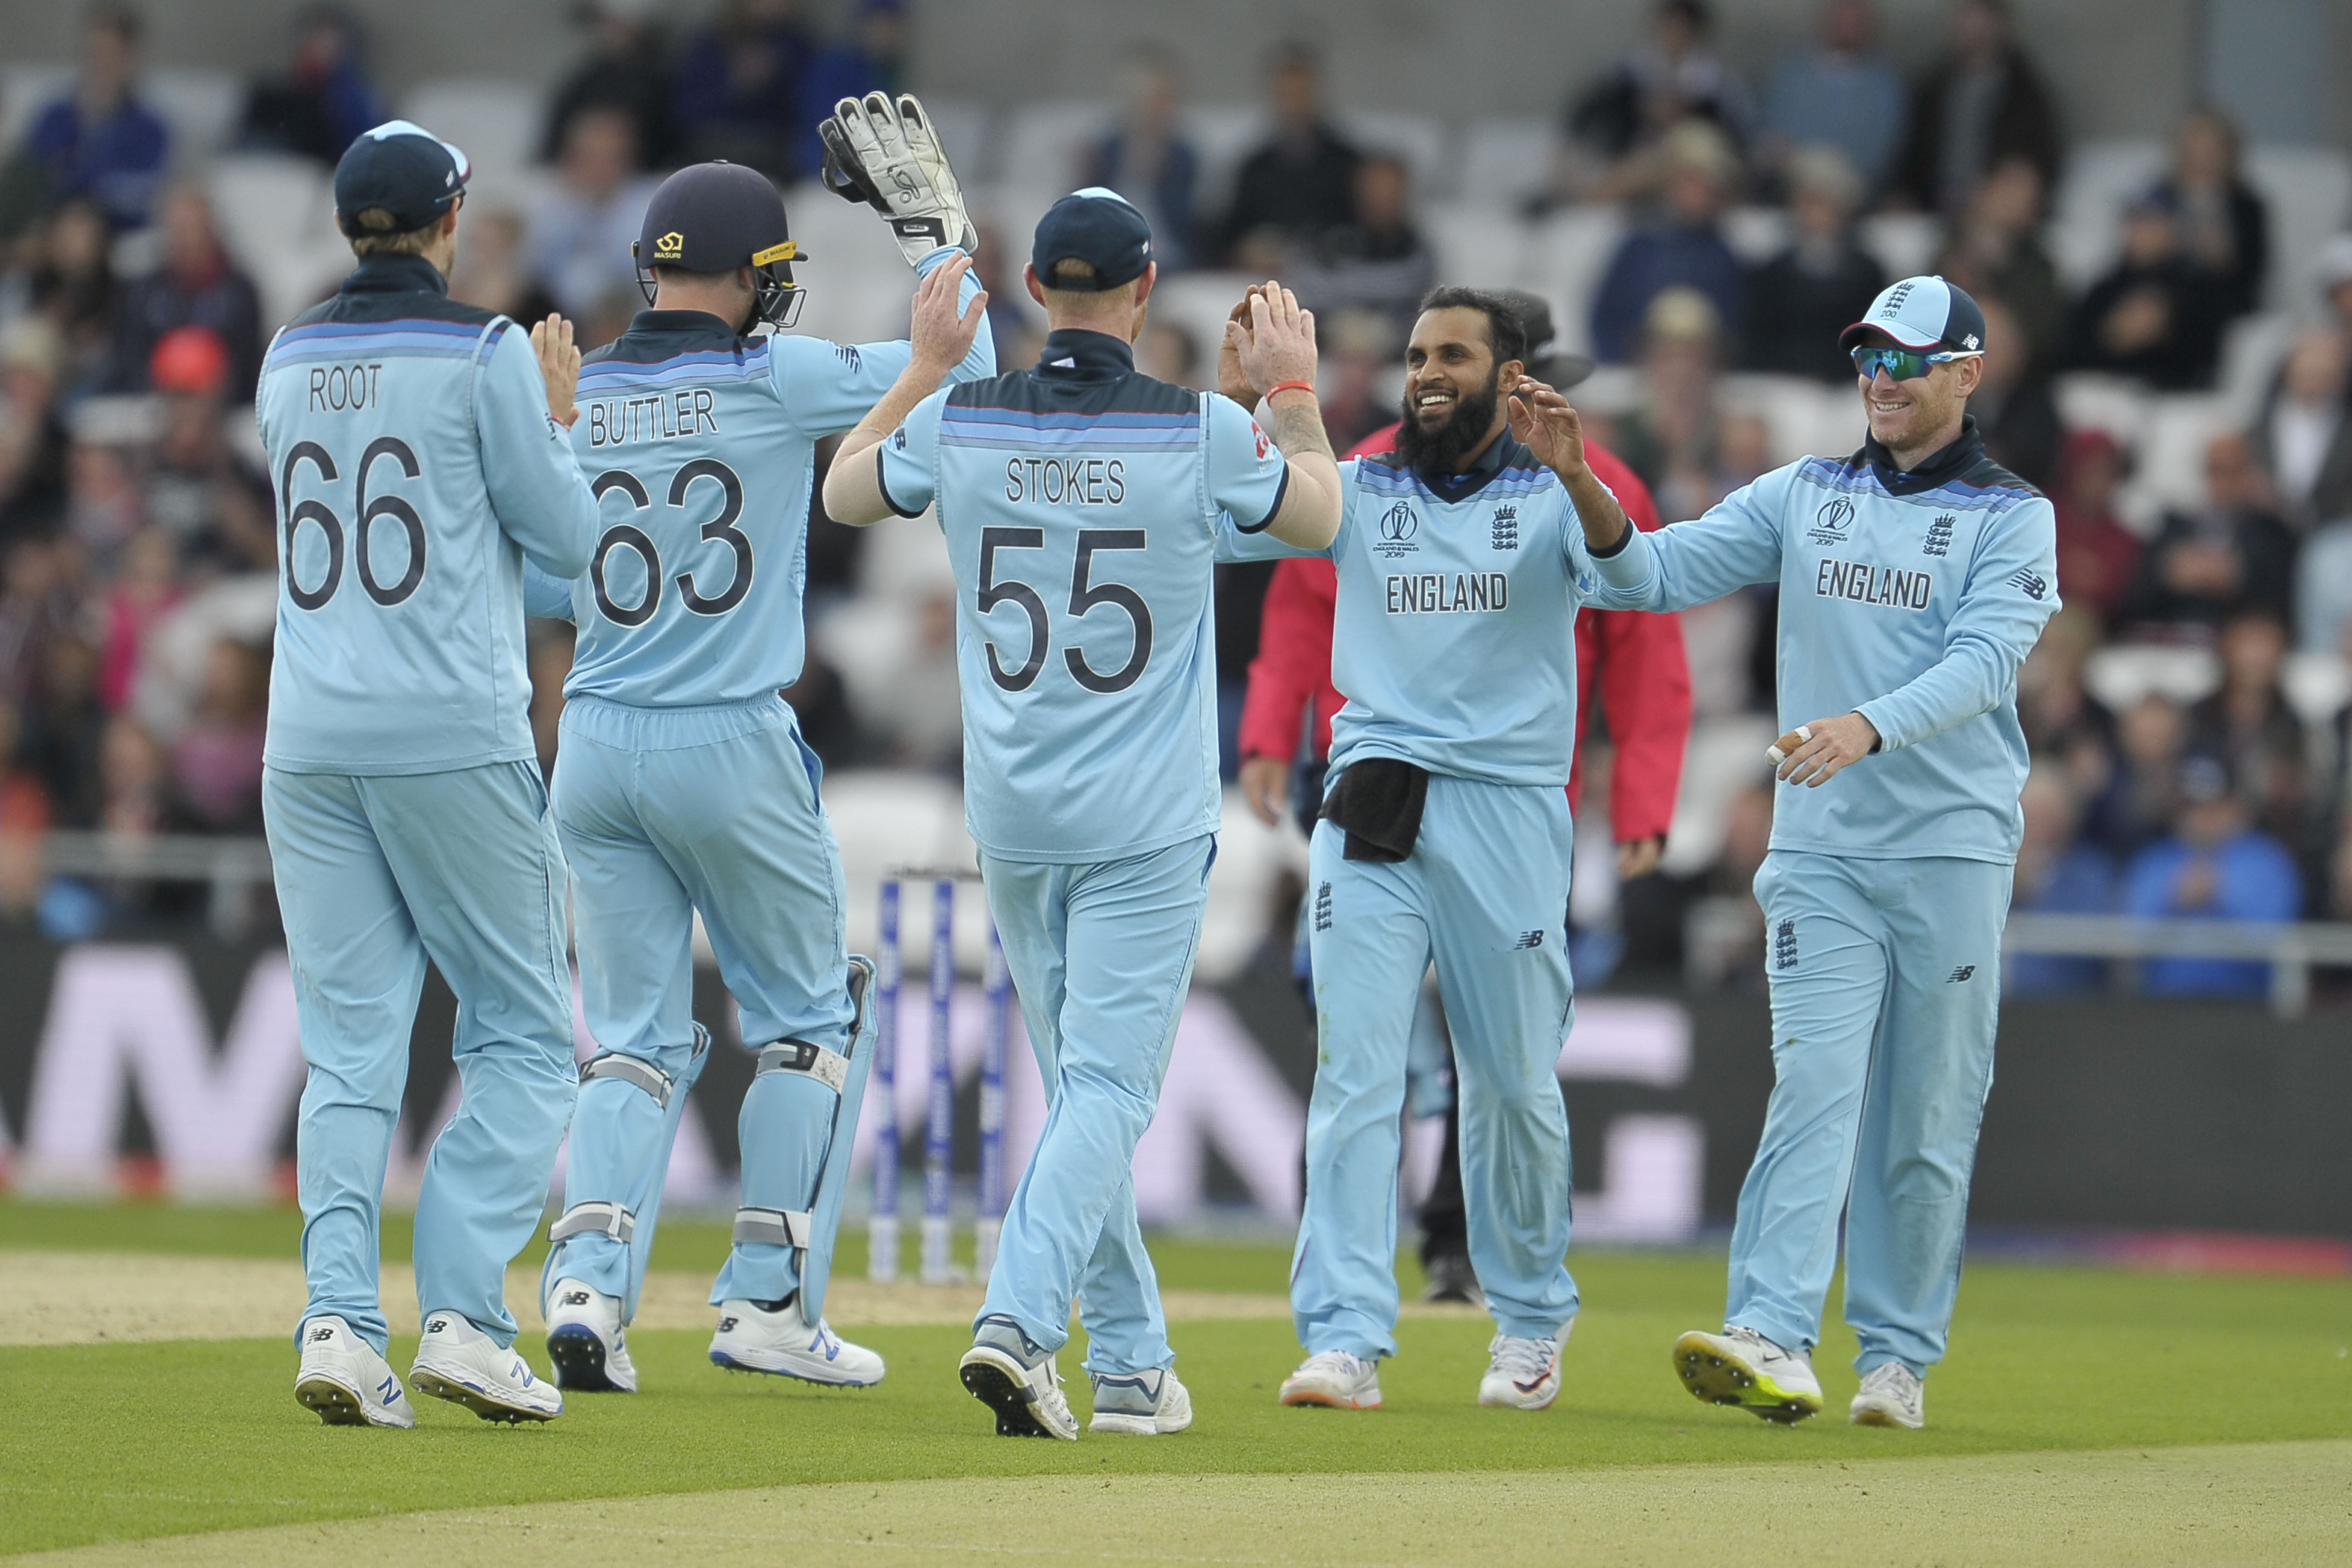 England a step away from elusive world cup: Dump Australia by 8 wickets